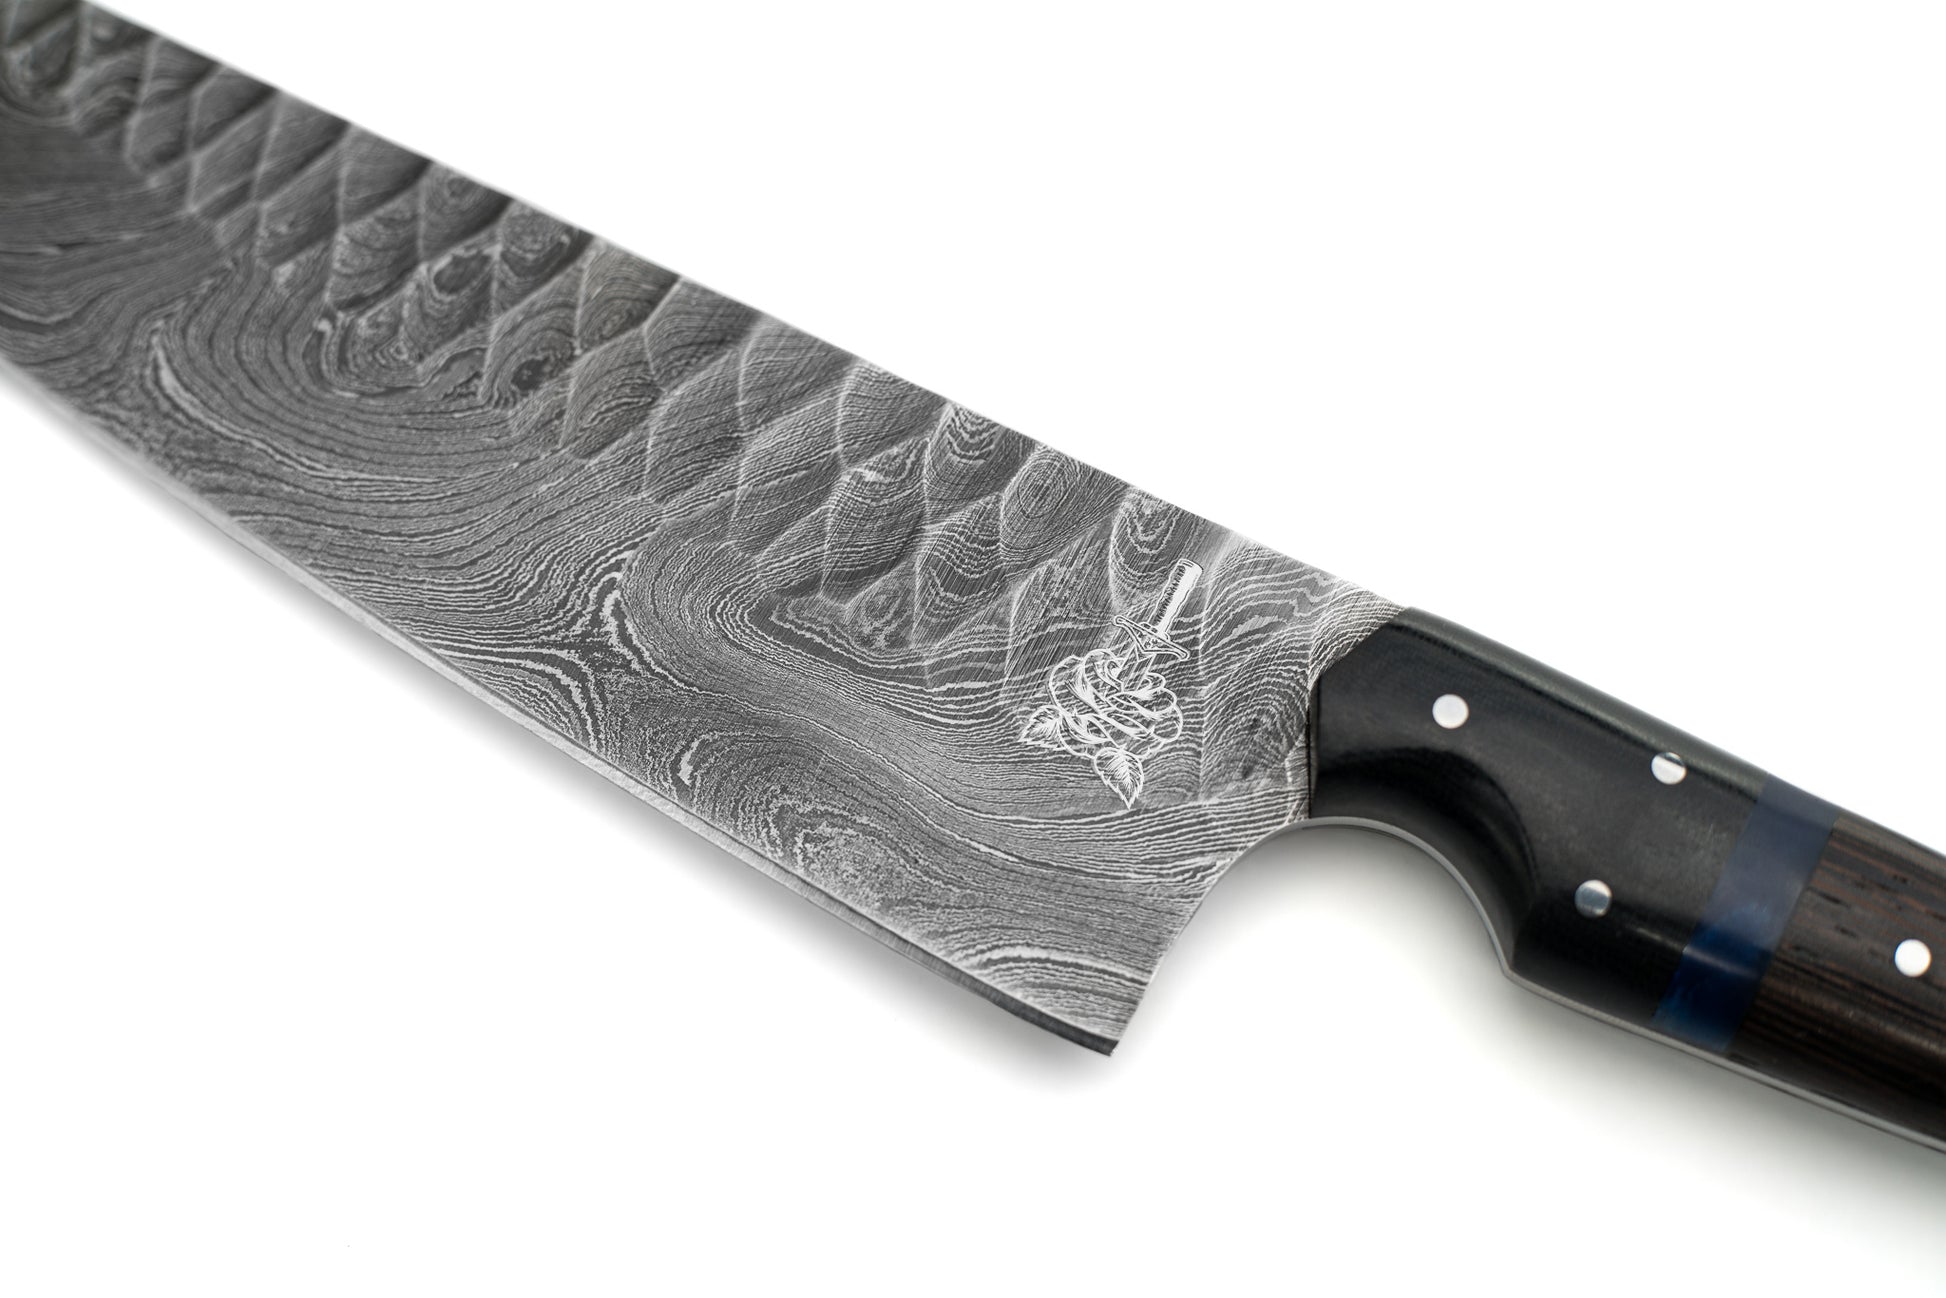 Damascus steel 3 Pc kitchen knives set - New year sale